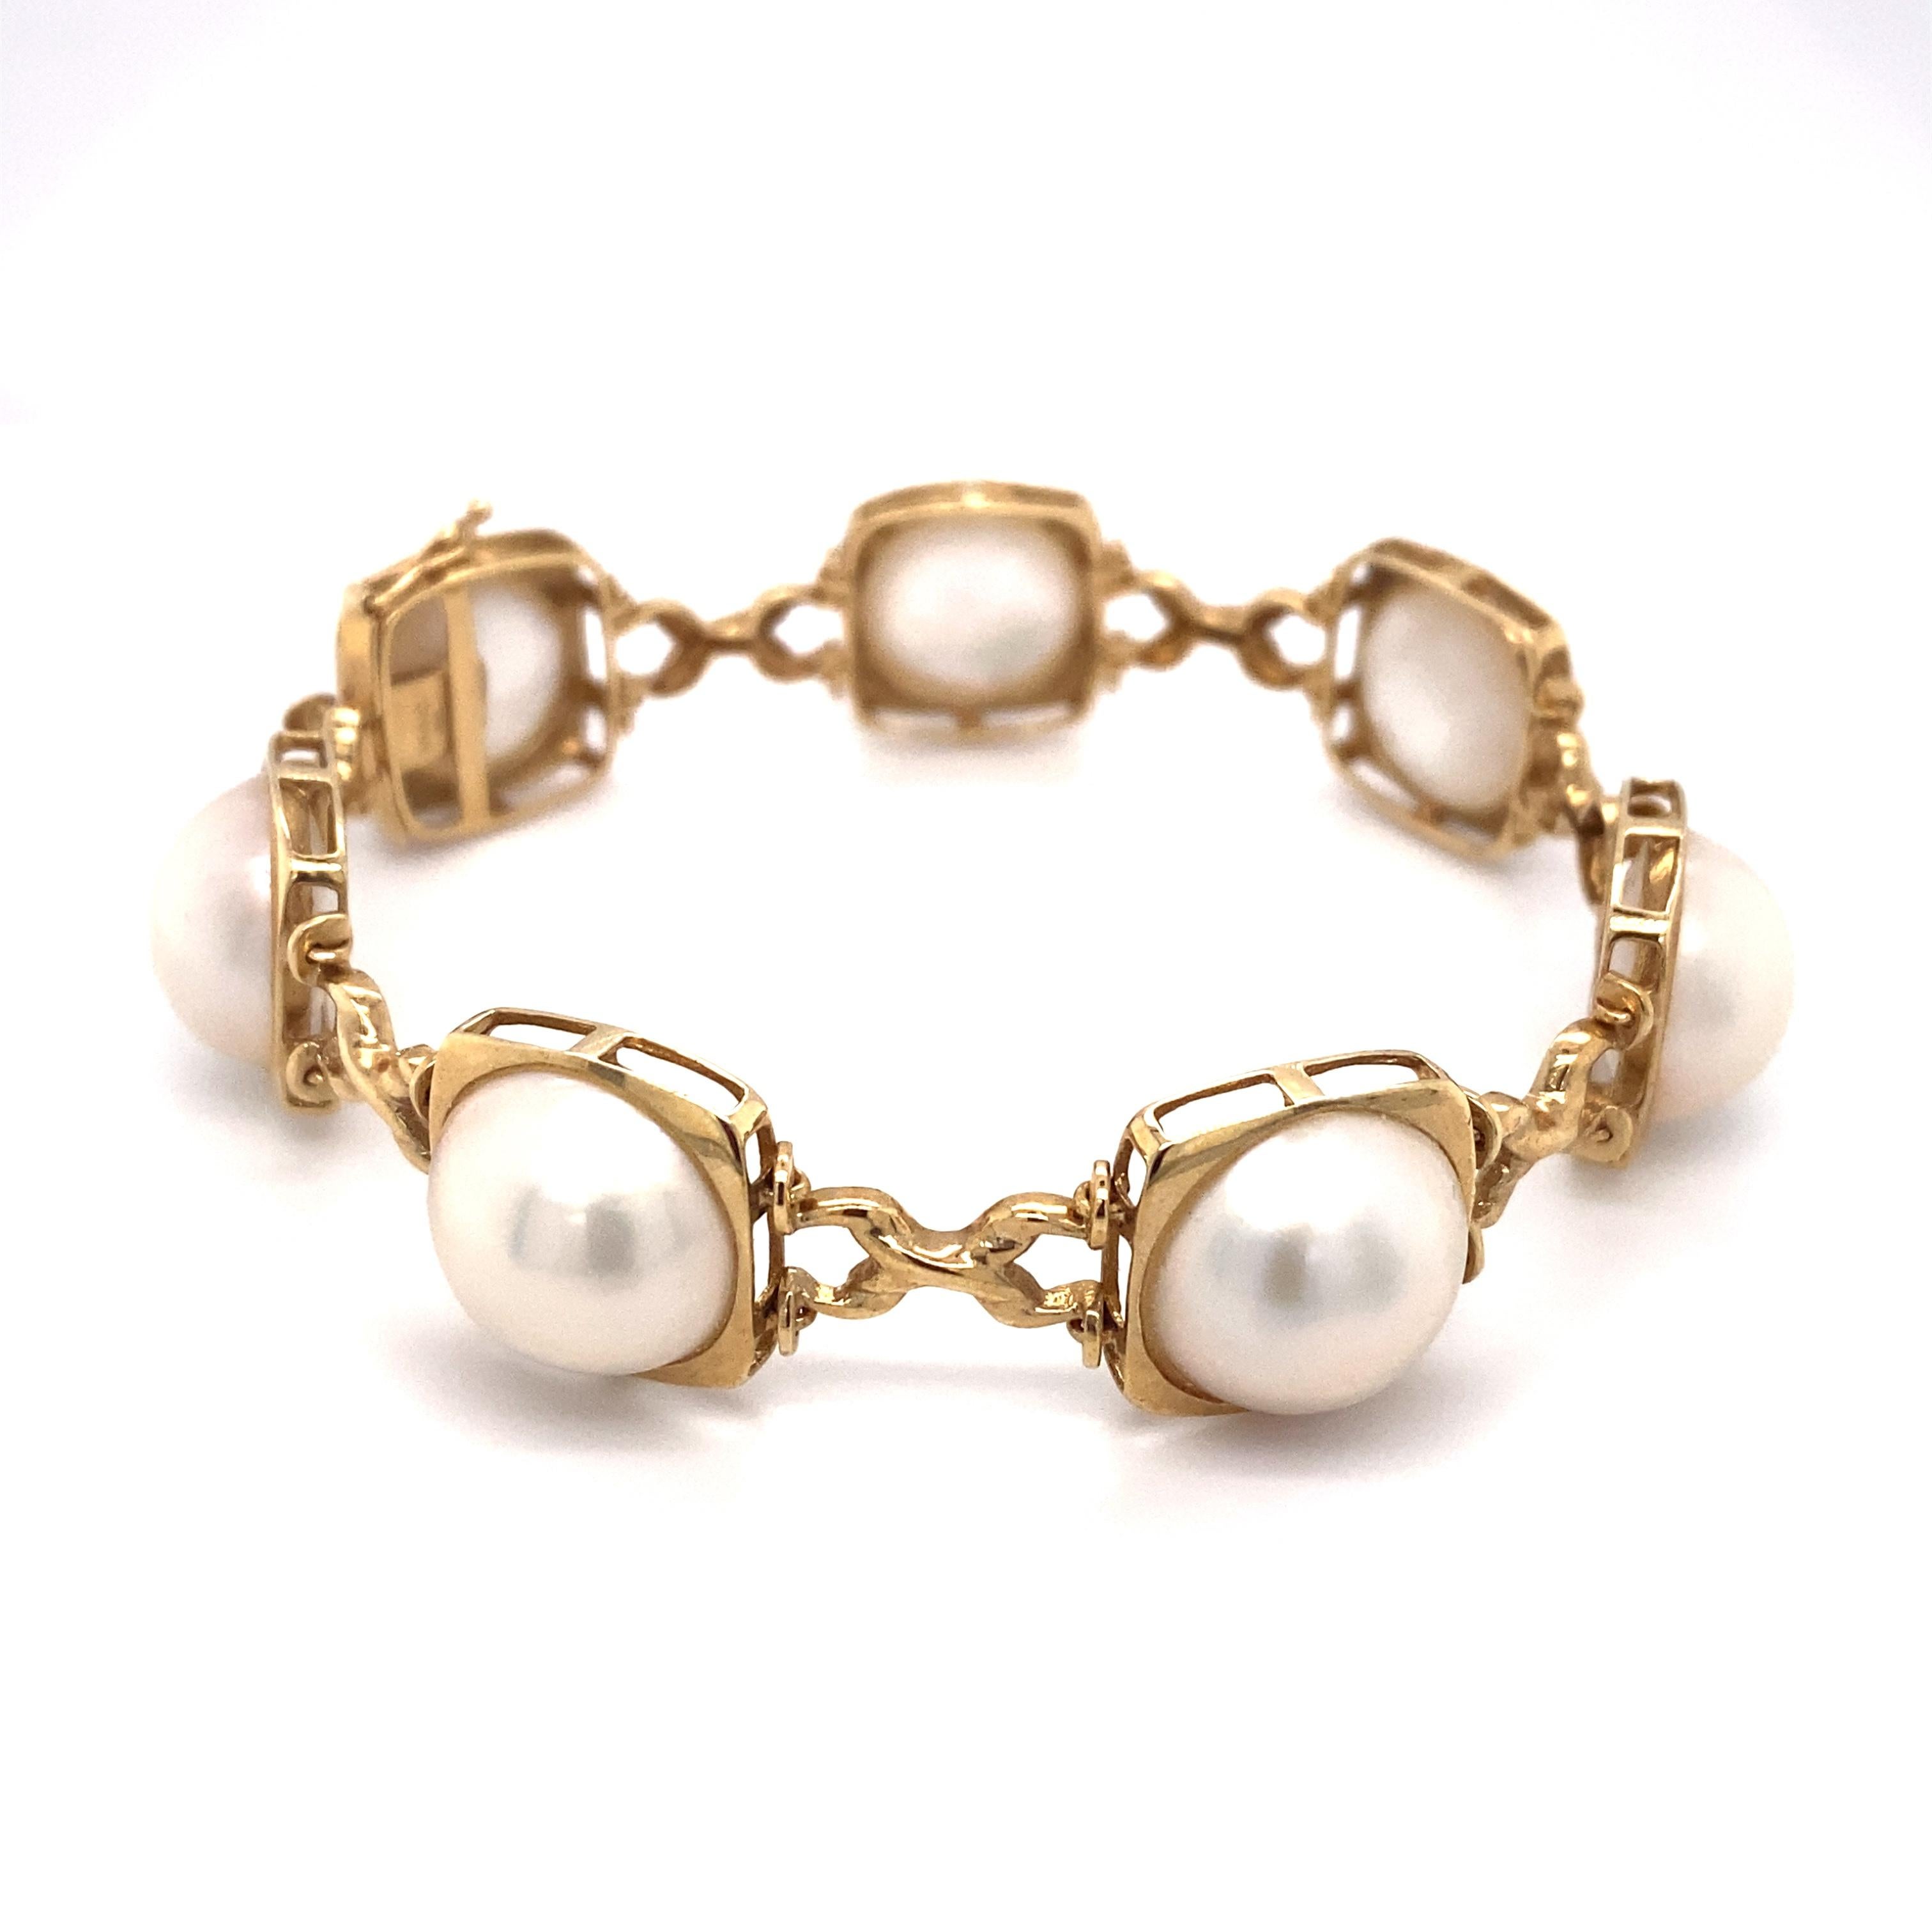 Circa: 1980s
Metal Type: 14 karat yellow gold
Weight: 18.2 grams
Dimensions: 7 inch length x 0.5 inch width 

Pearl Details: 
Mabe Pearl
Size: 12.5mm